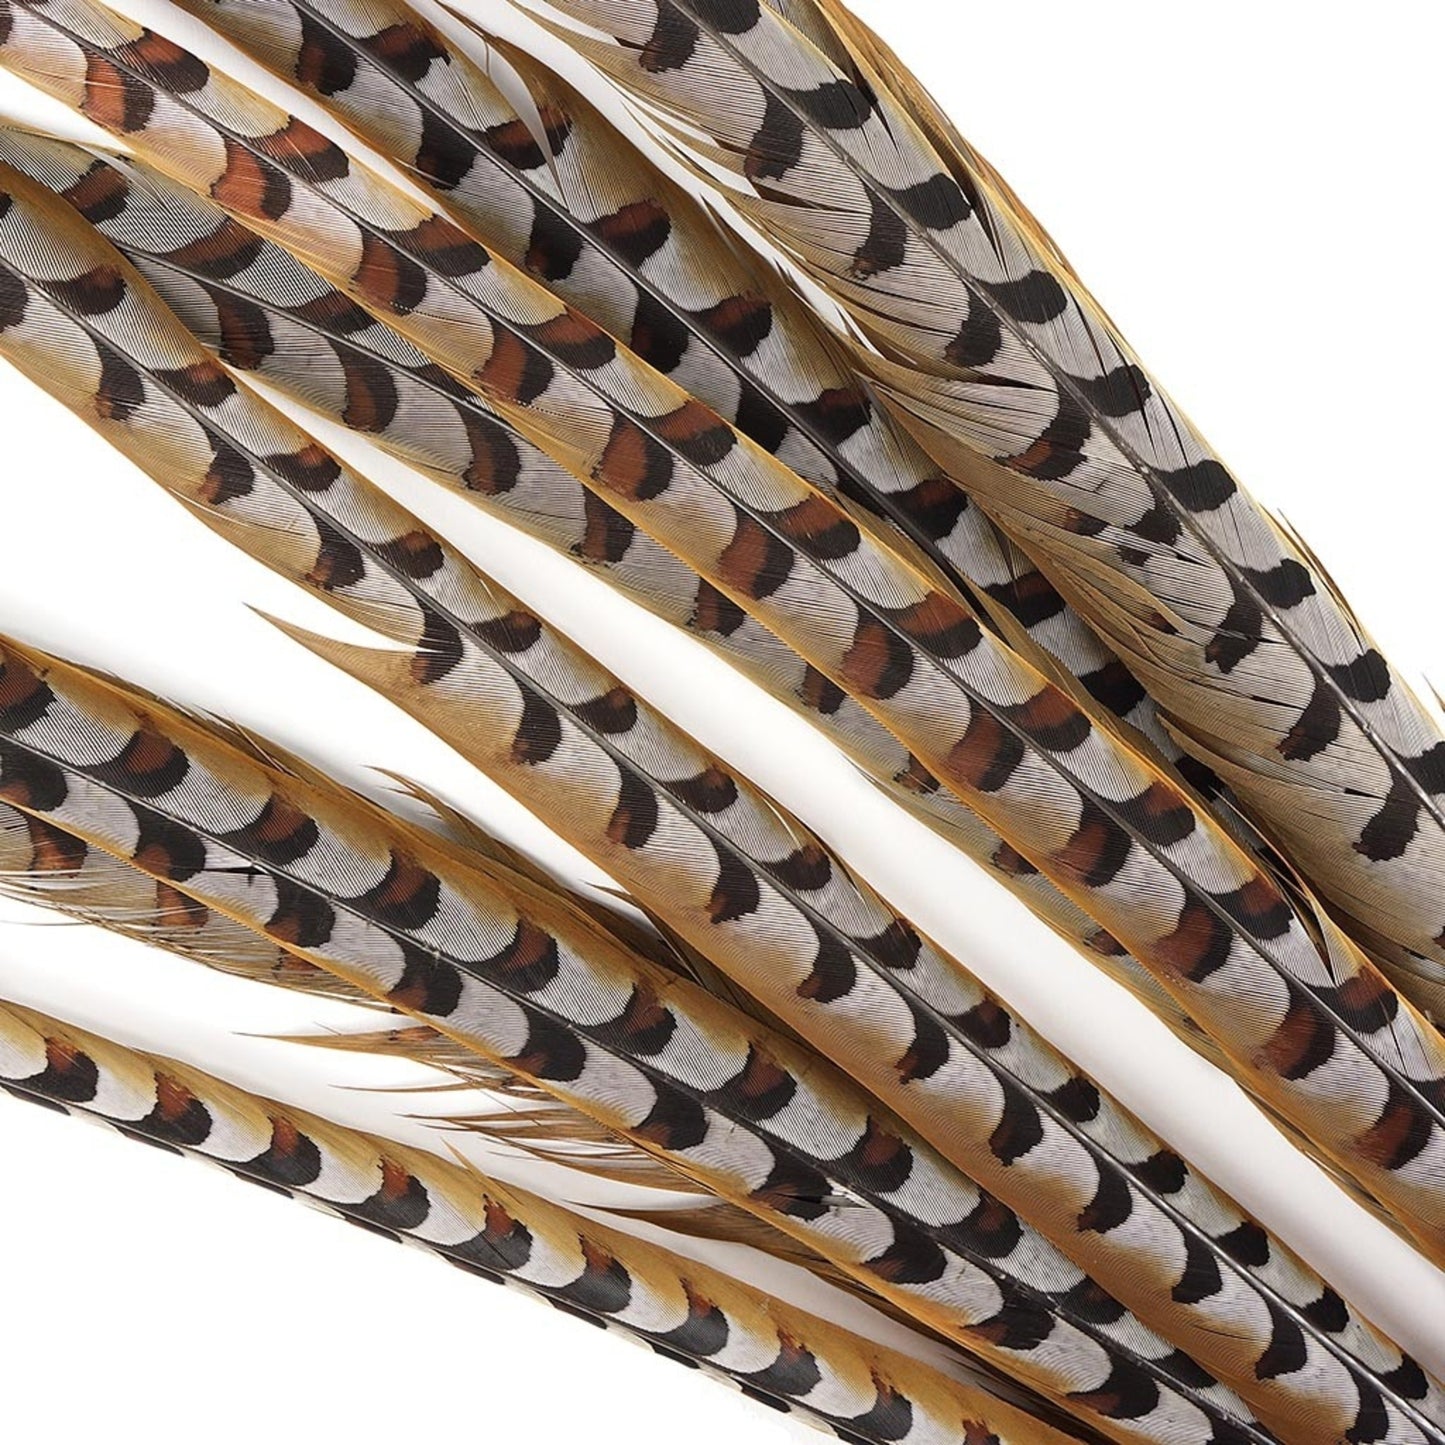 Reeves Pheasant Tails 4-60"